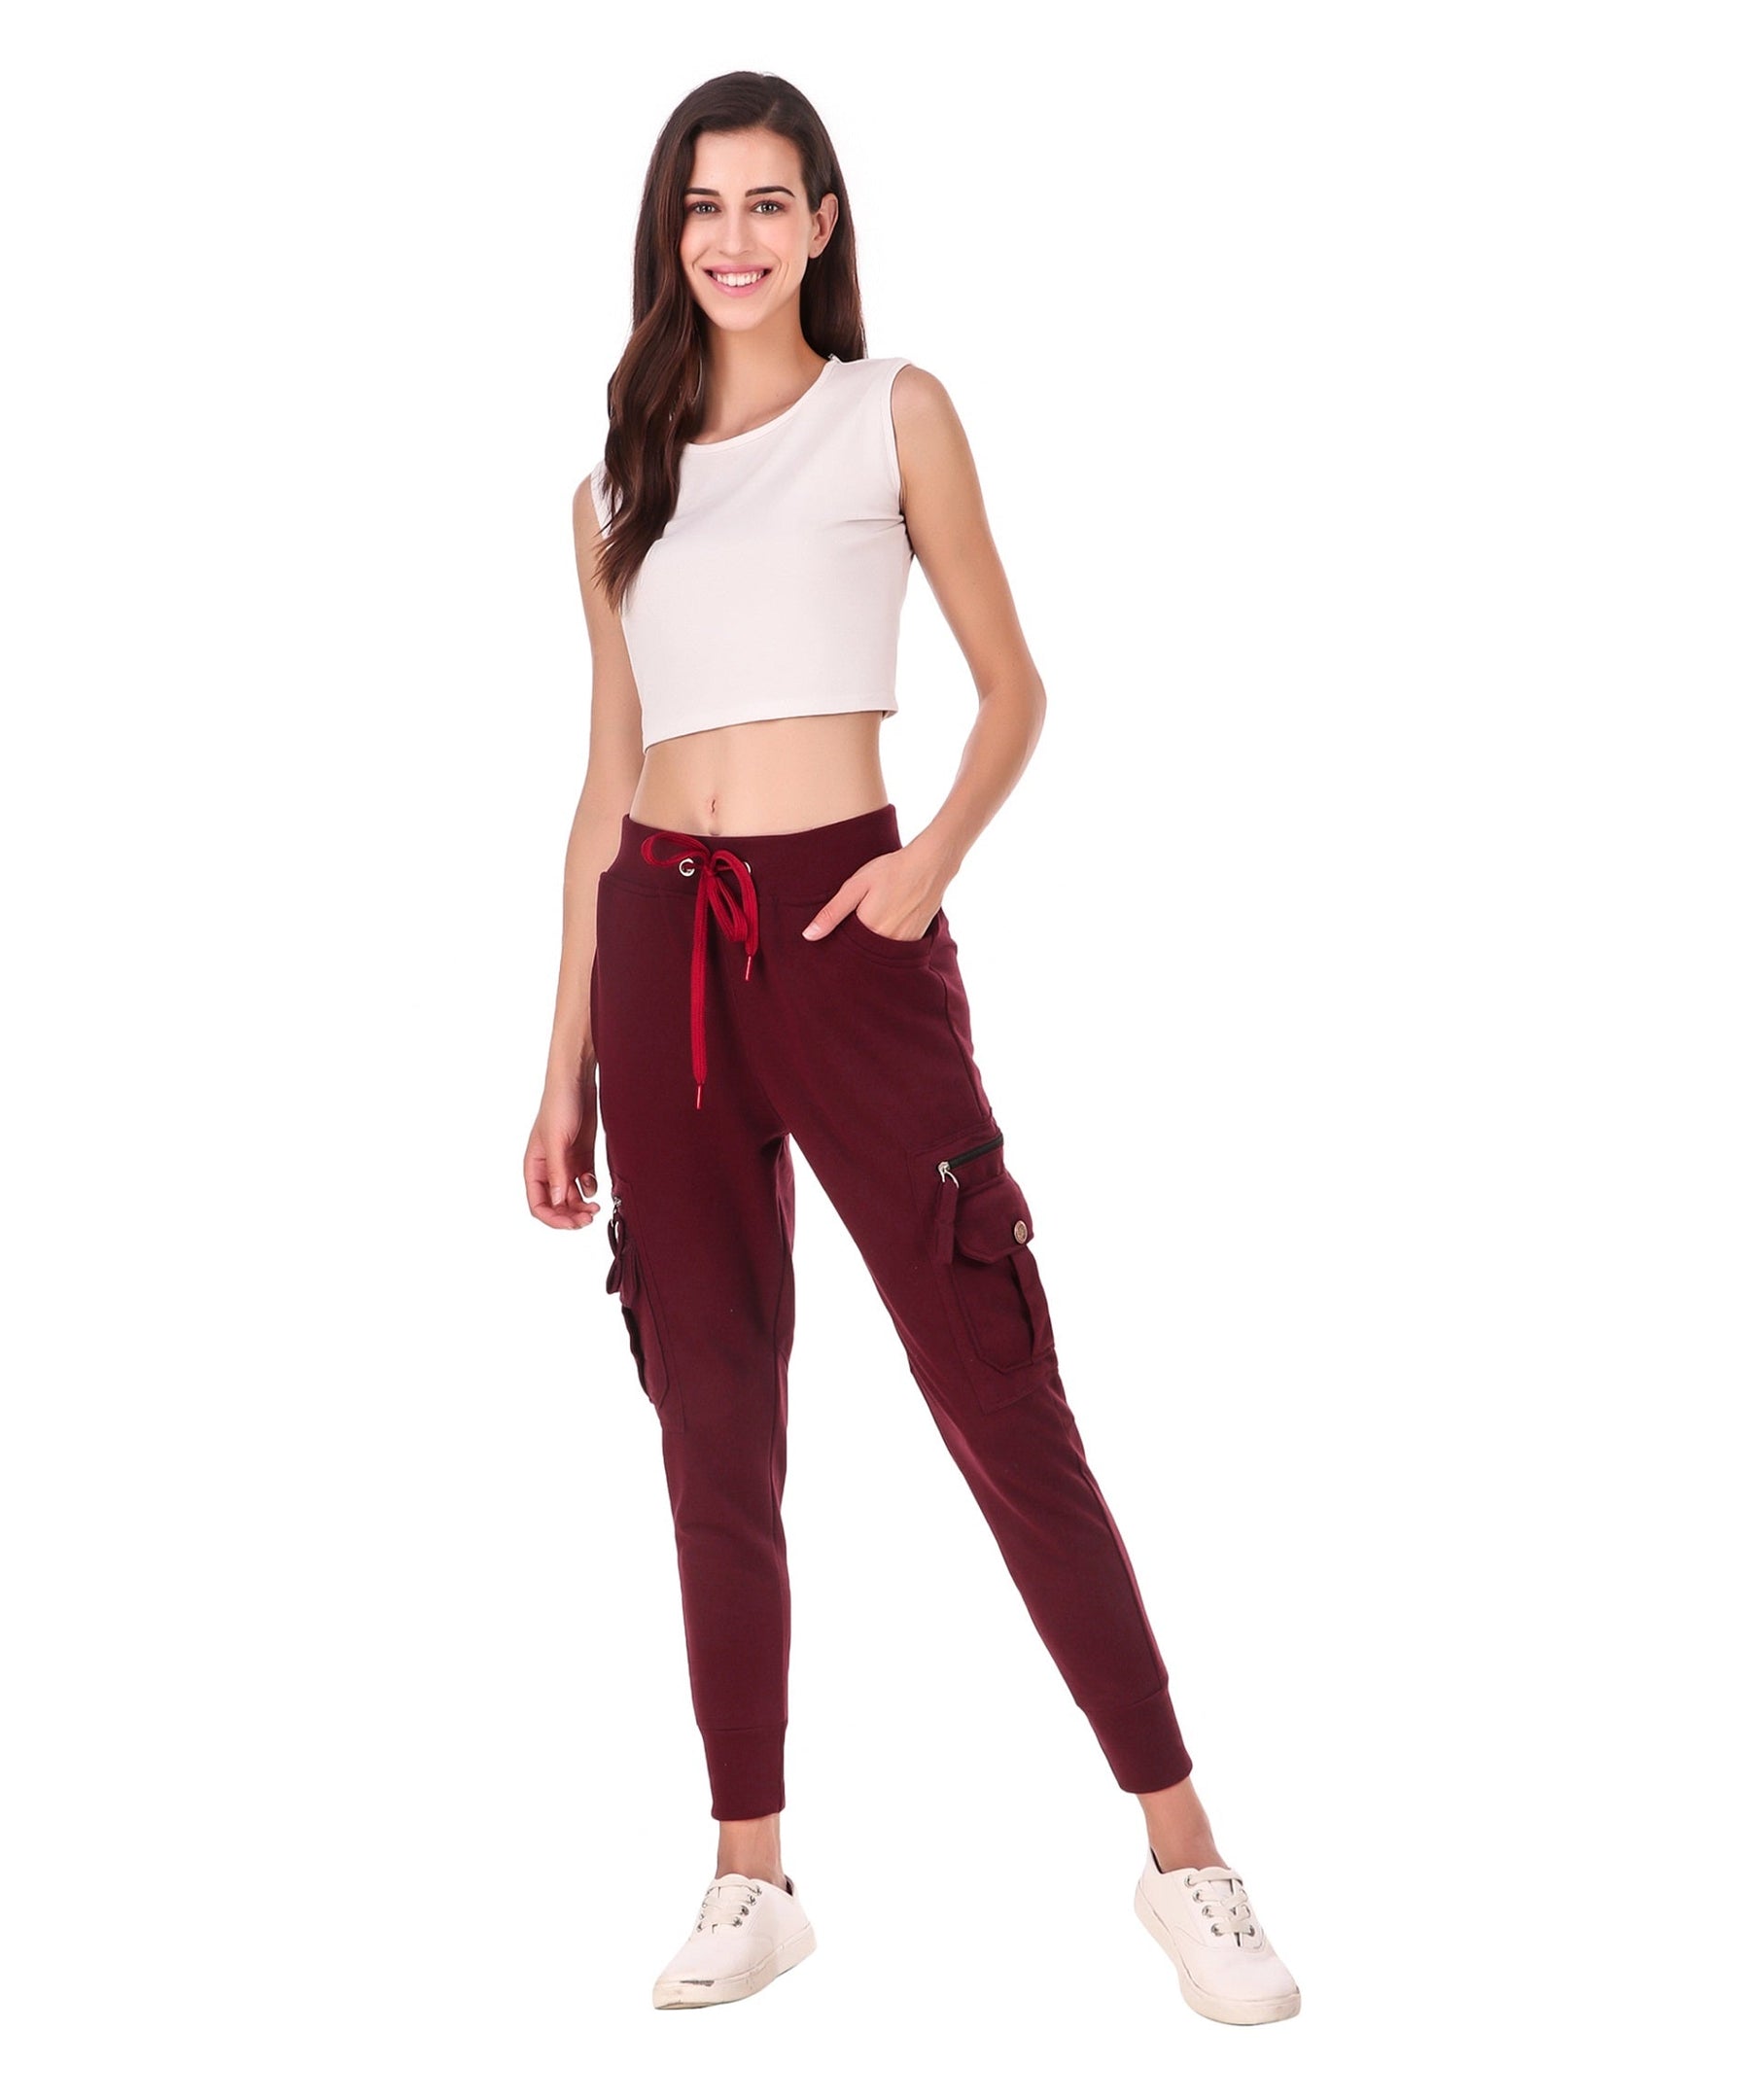 Women's Cotton Slim Fit Cargo Joggers Track Pants with 4 Zippered Pockets